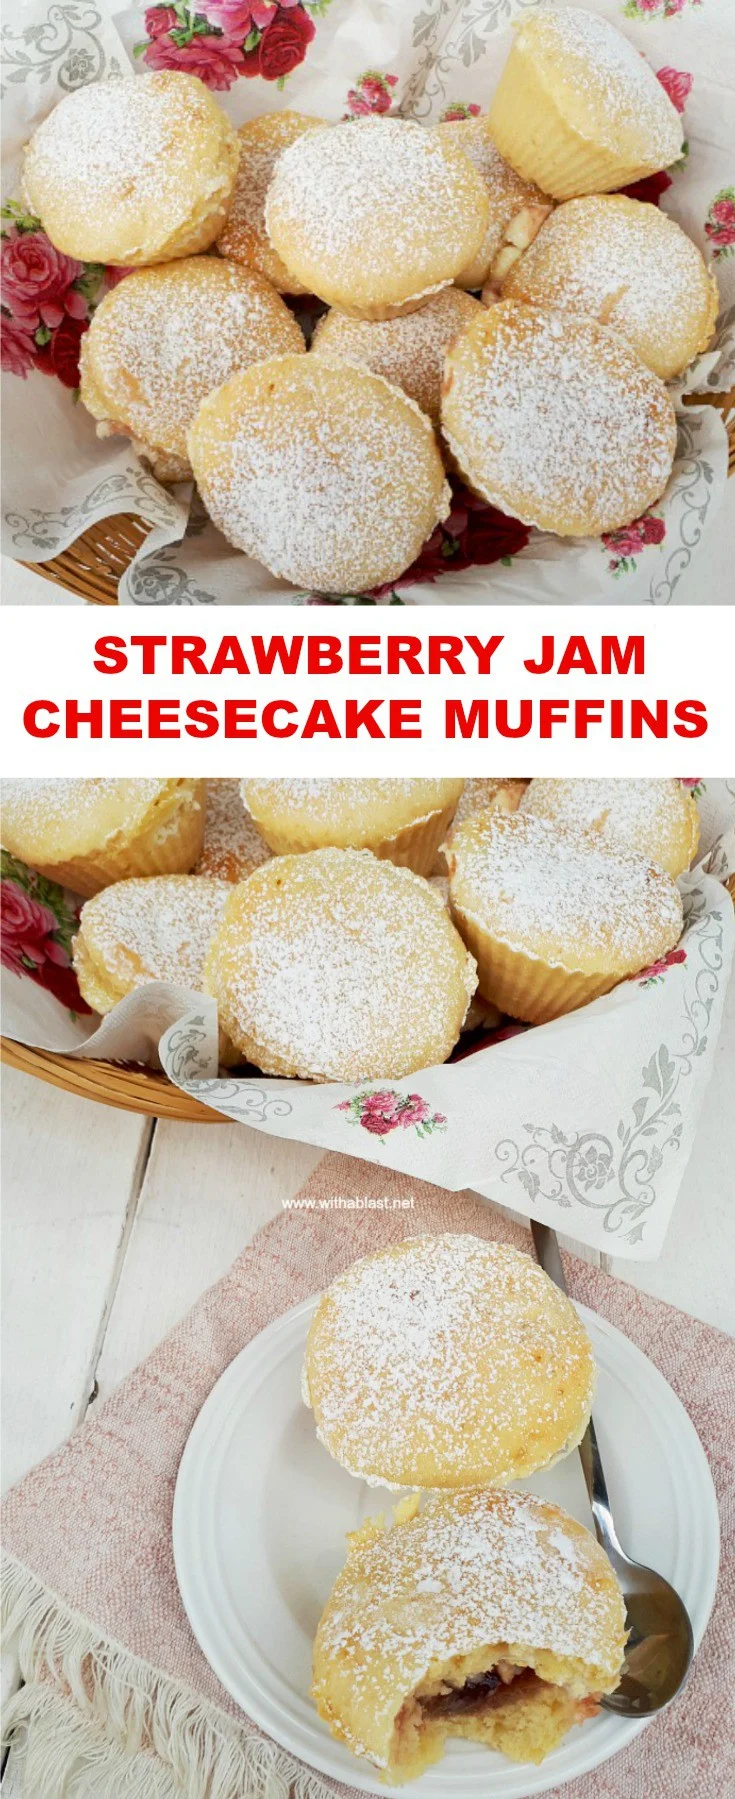 Strawberry Jam Cheesecake Muffins are a delicious addition to a tea time plate, breakfast and can even be served as a light dessert #MuffinRecipes #EasyStuffedMuffins #StrawberryMuffins